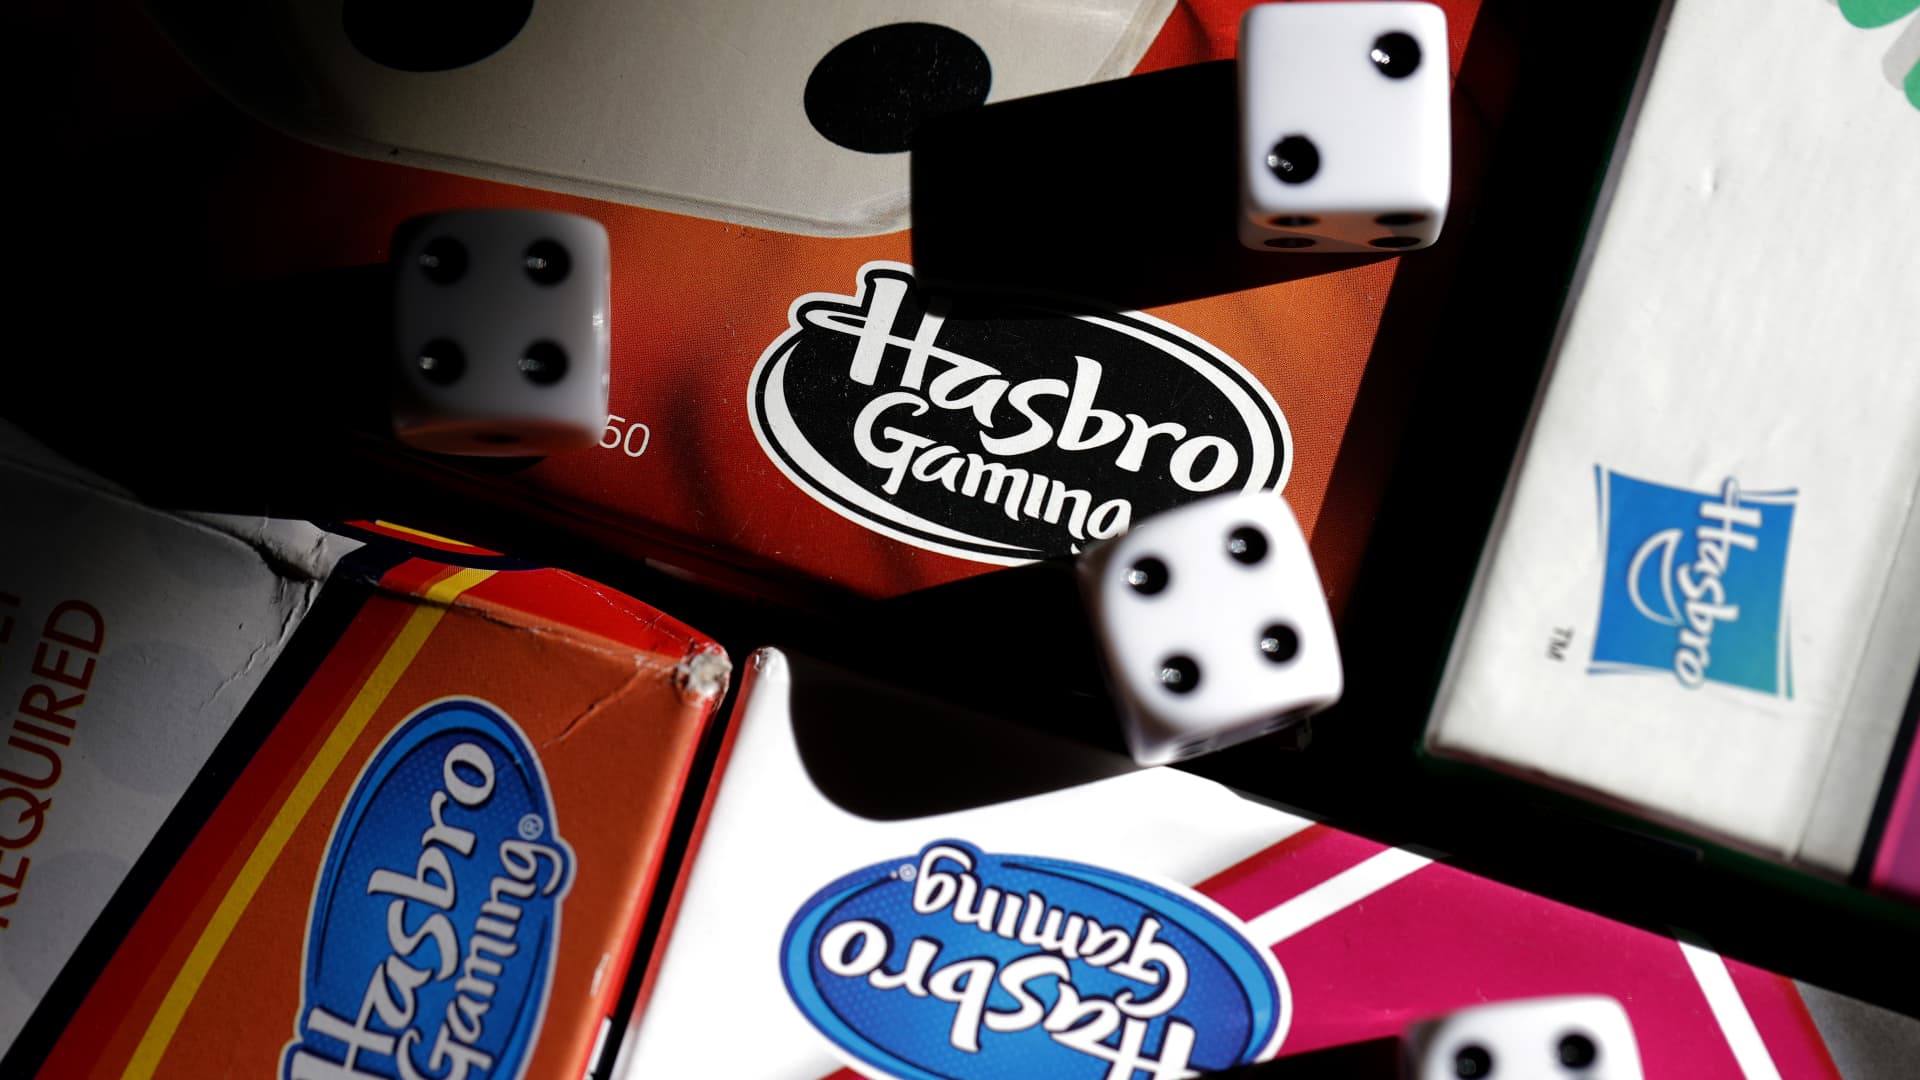 Hasbro warns of weak holiday quarter results, cuts 15% of its workforce